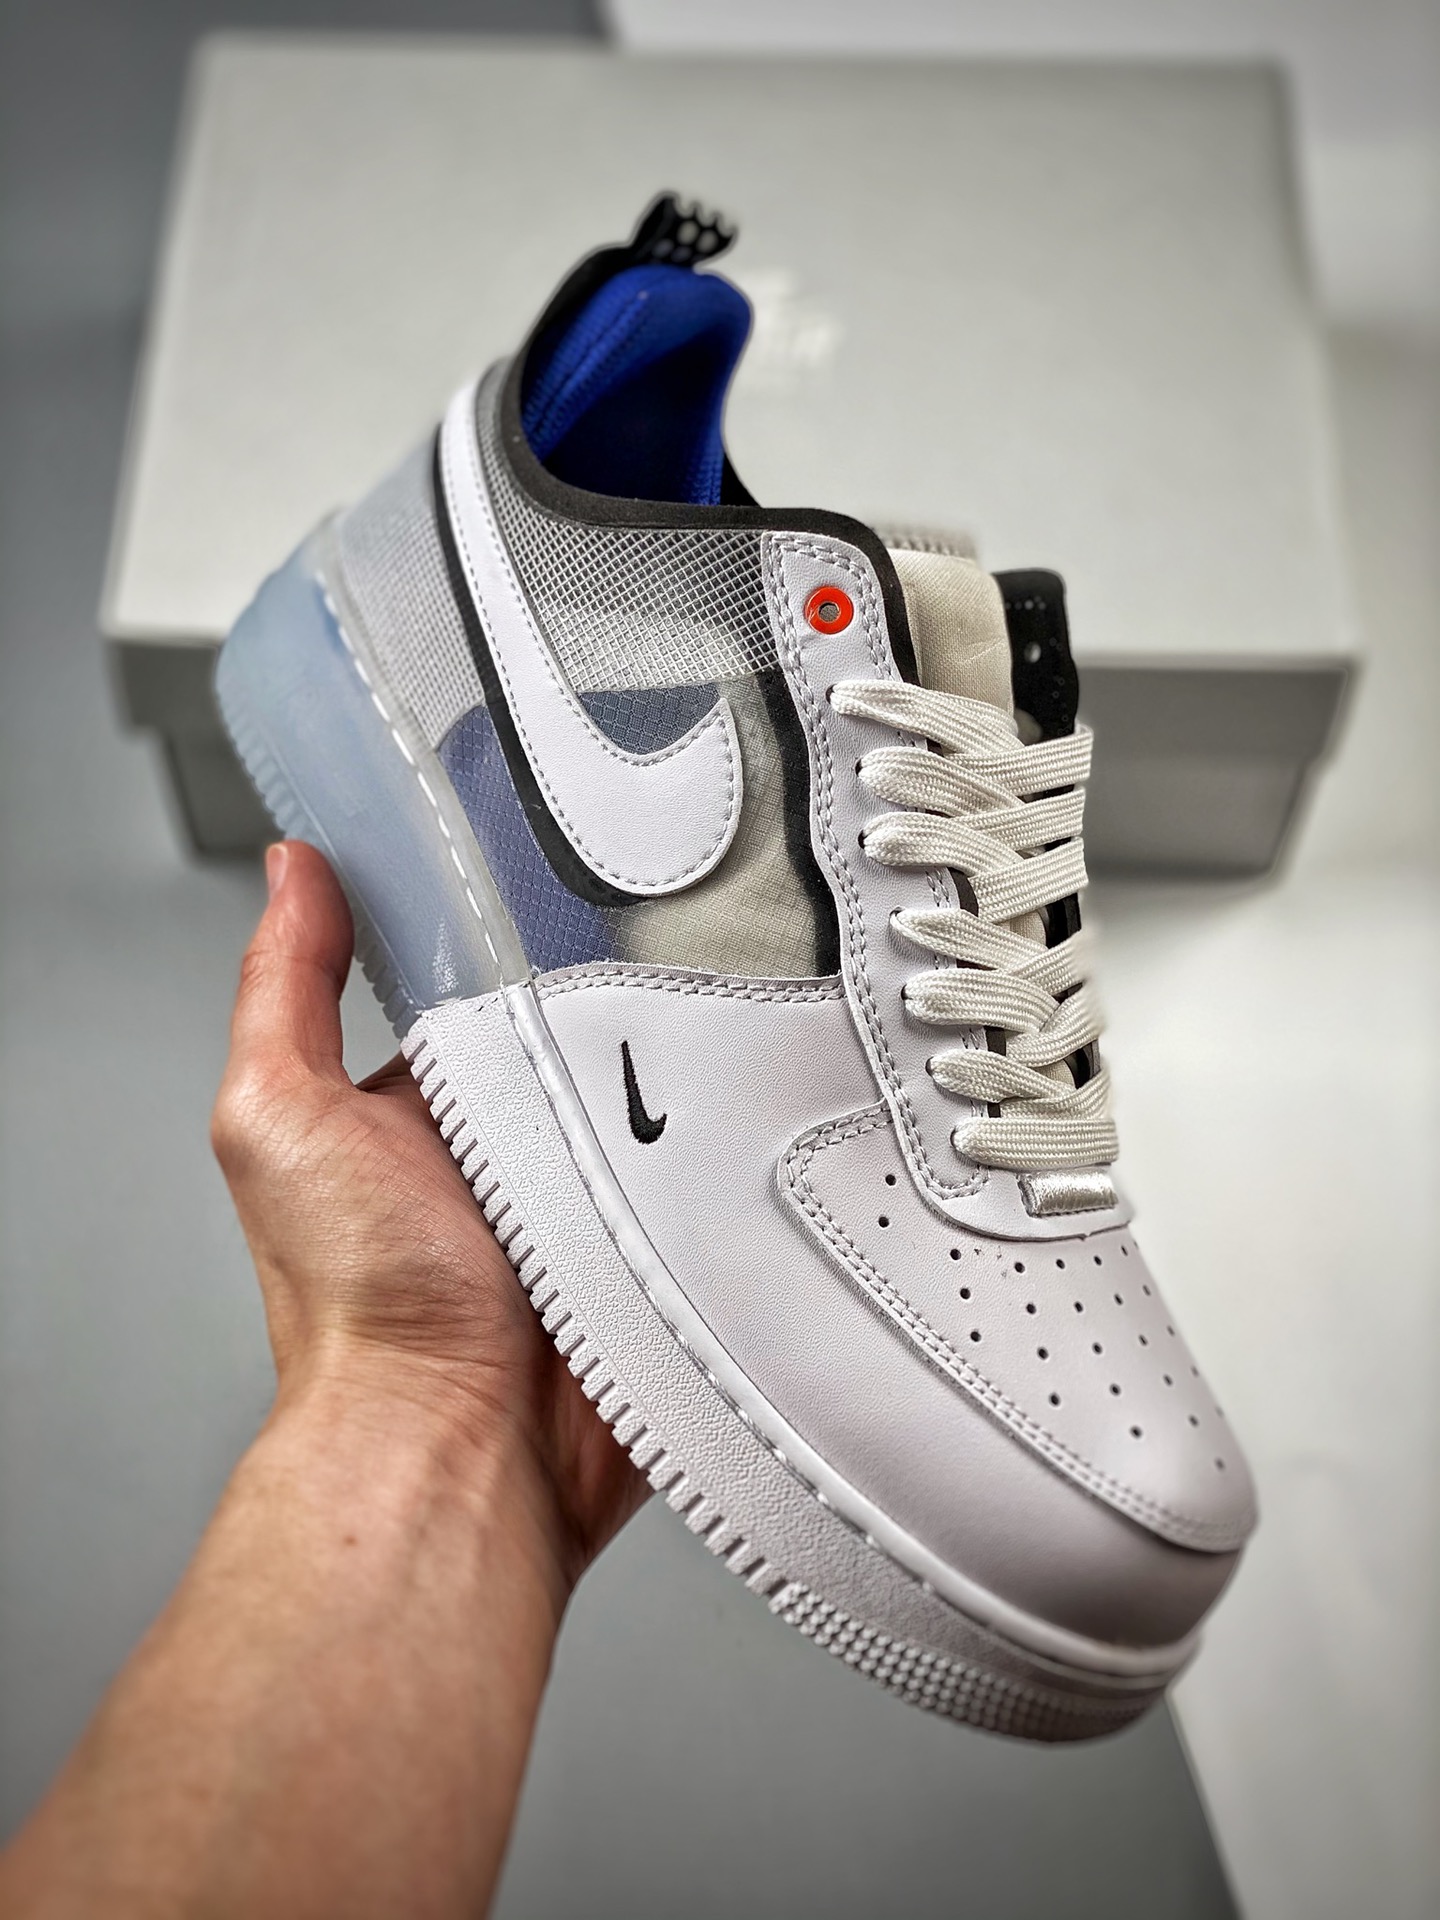 Nike Air AF Force 1 React White/Light Photo Blue DH7615-101 Shoes